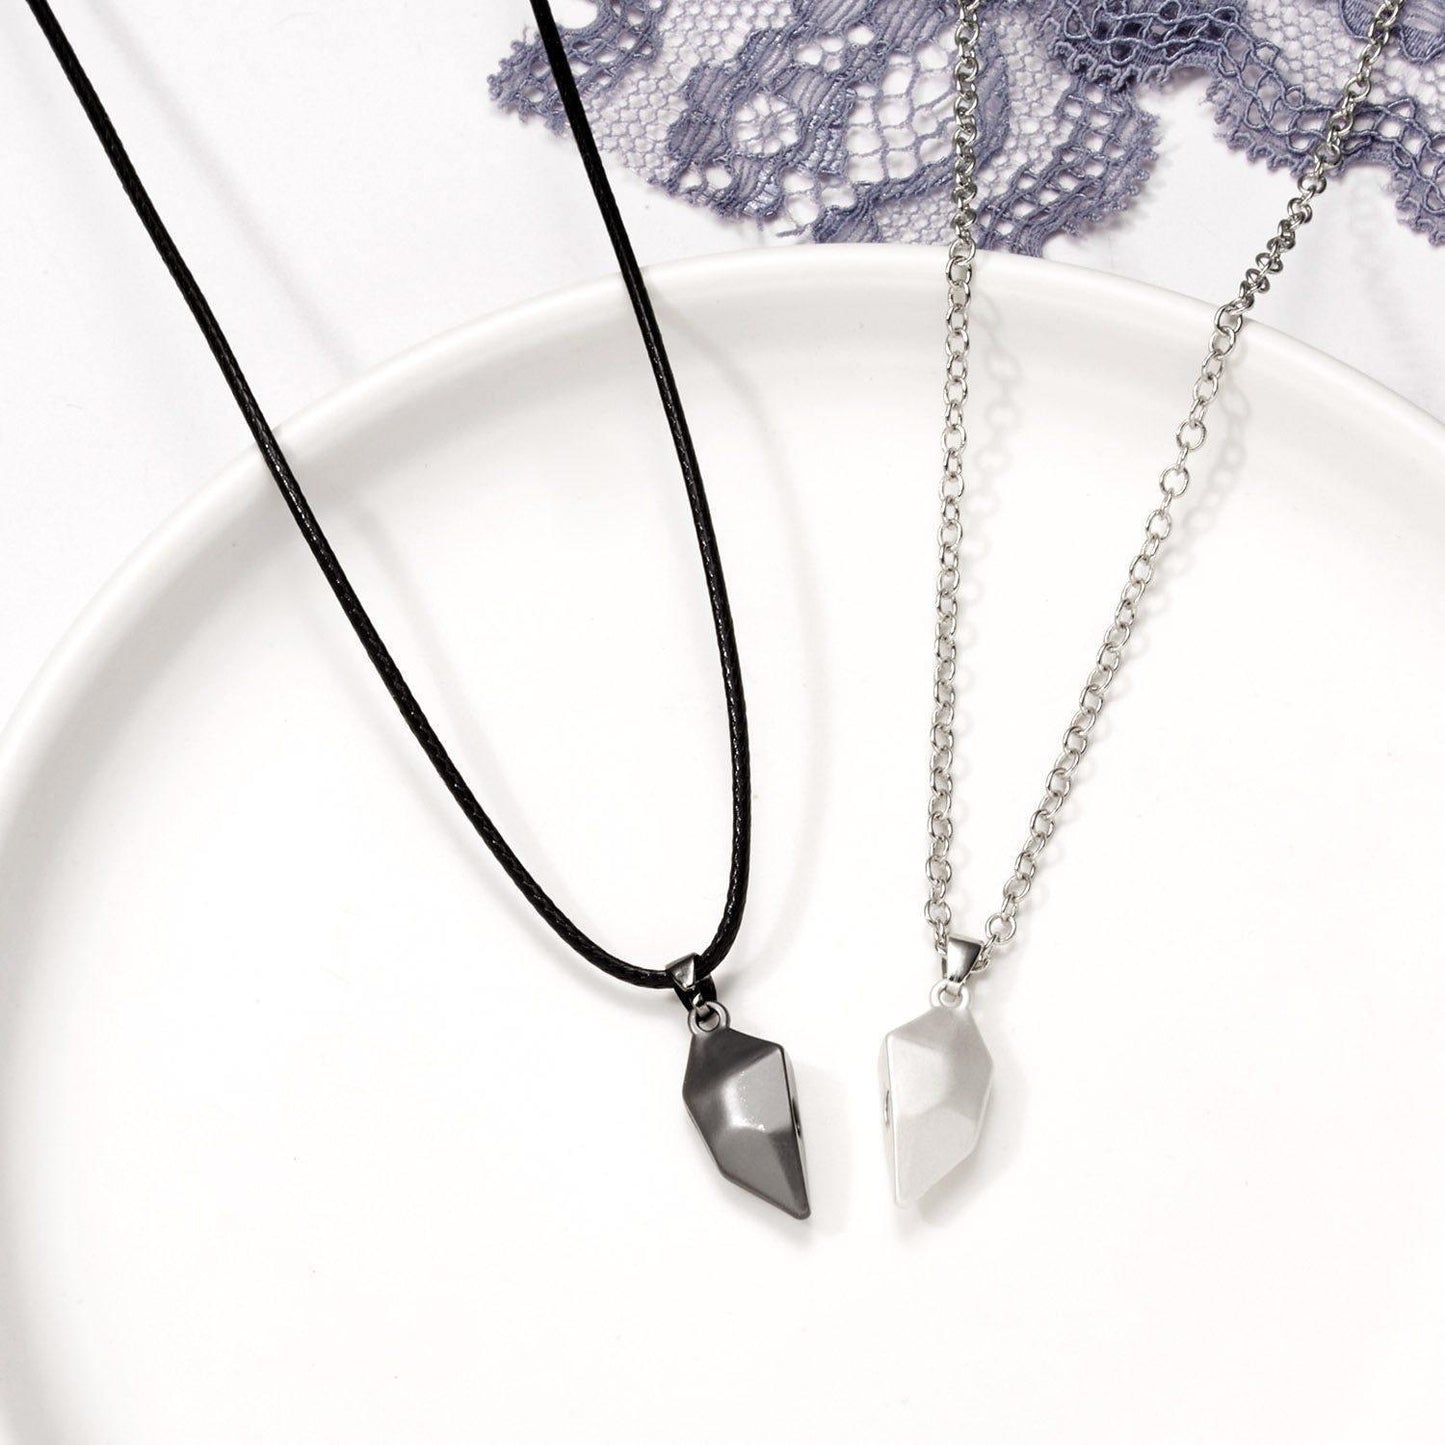 Magnetic Connecting Best Friend Necklace For Bestie in 2023 | Magnetic Connecting Best Friend Necklace For Bestie - undefined | best friend necklace for 2, best friend necklaces magnetic, Friendship Pendant Necklaces, gift ideas for Best Friends, Magnetic Friendship necklace, Magnetic heart Necklace, To My Best Friend Friendship Gift Necklace Set | From Hunny Life | hunnylife.com